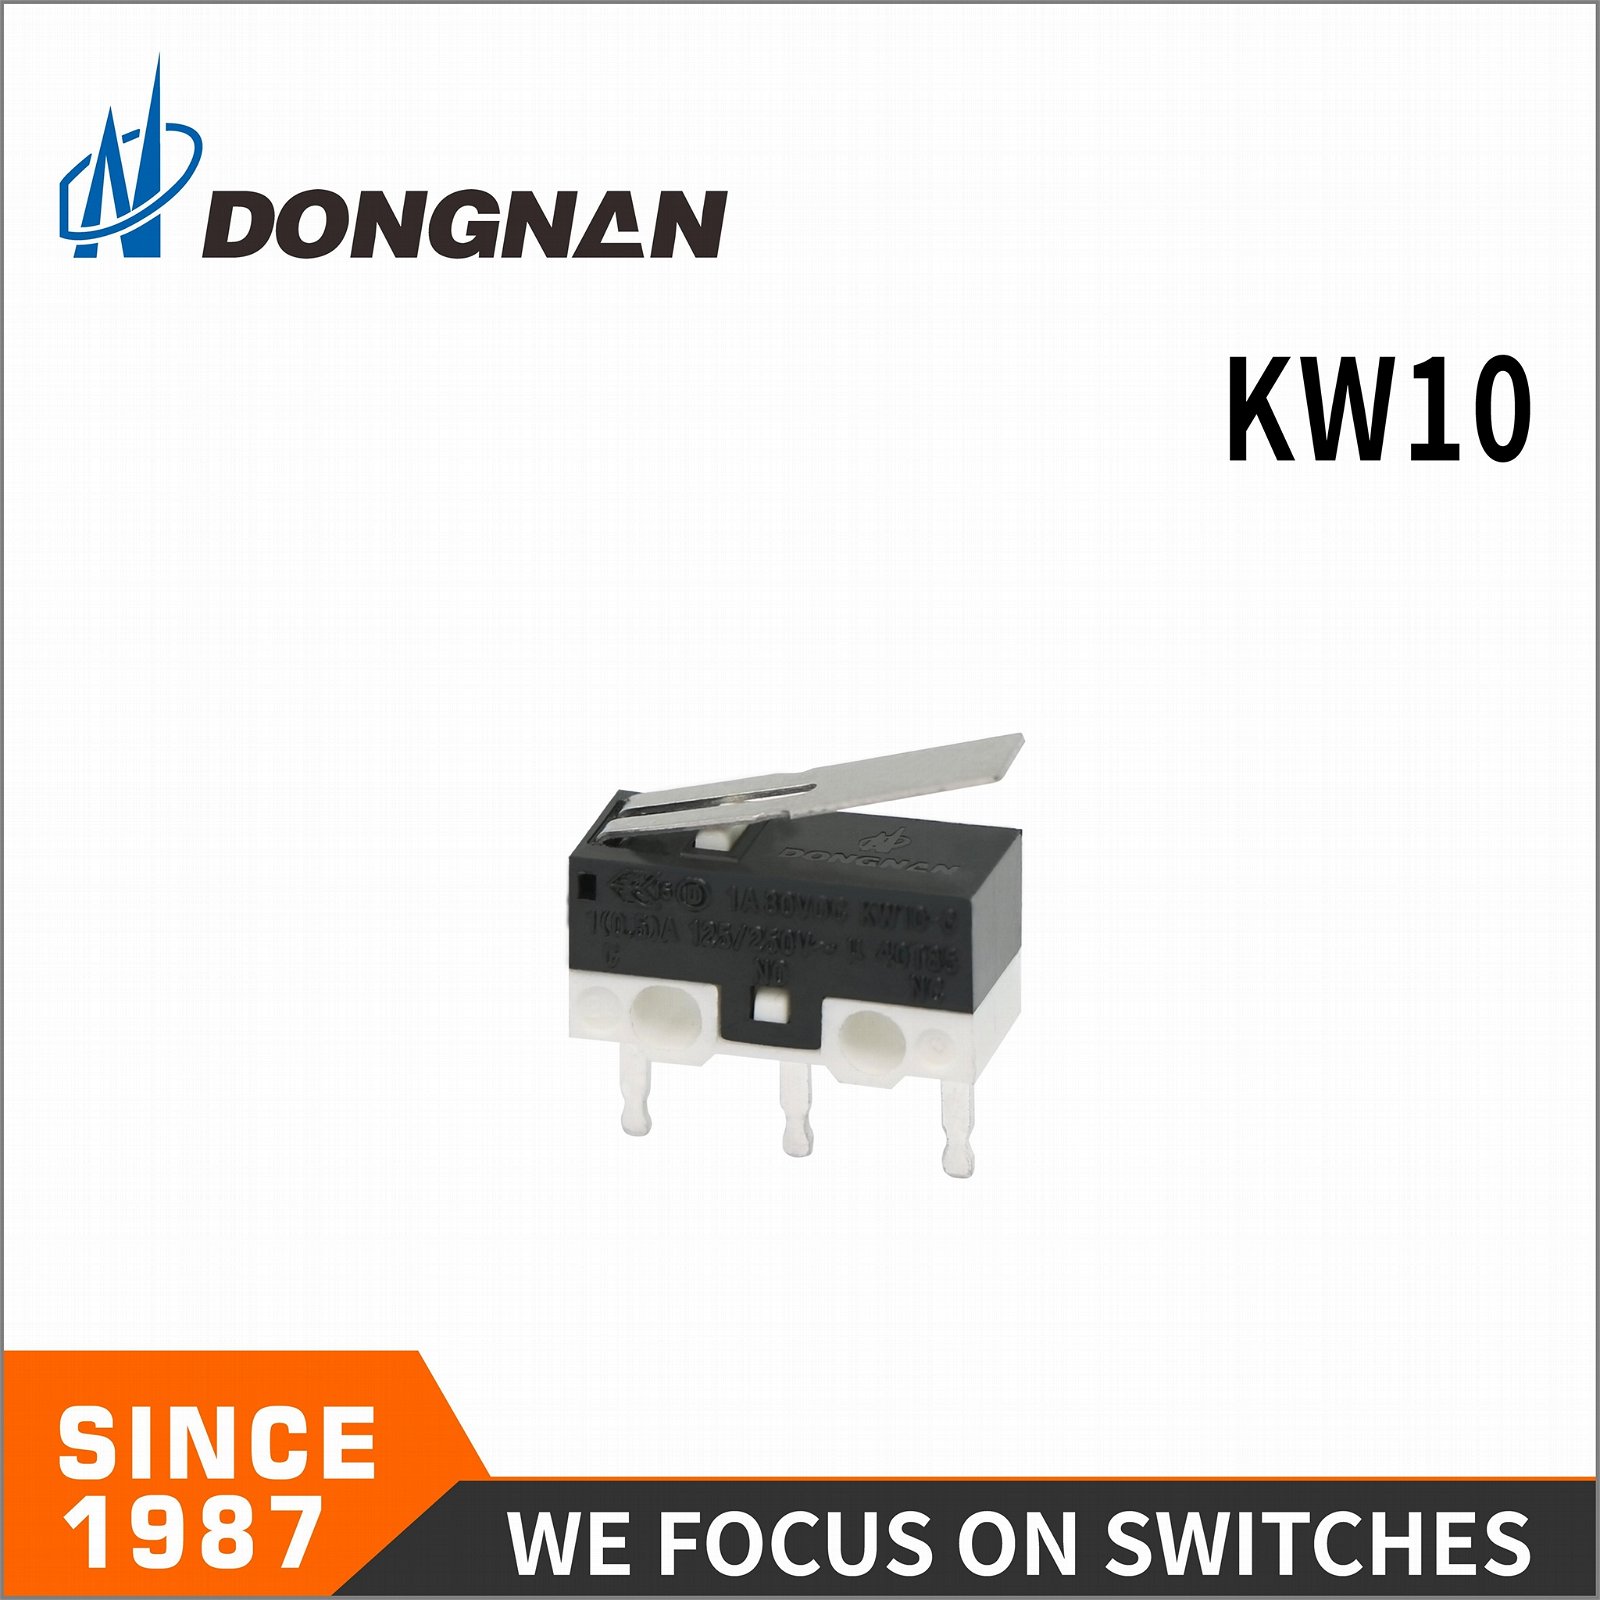 Used in Home Appliance, Audio Video Device, Computer Subminiature  Micro Switch 2